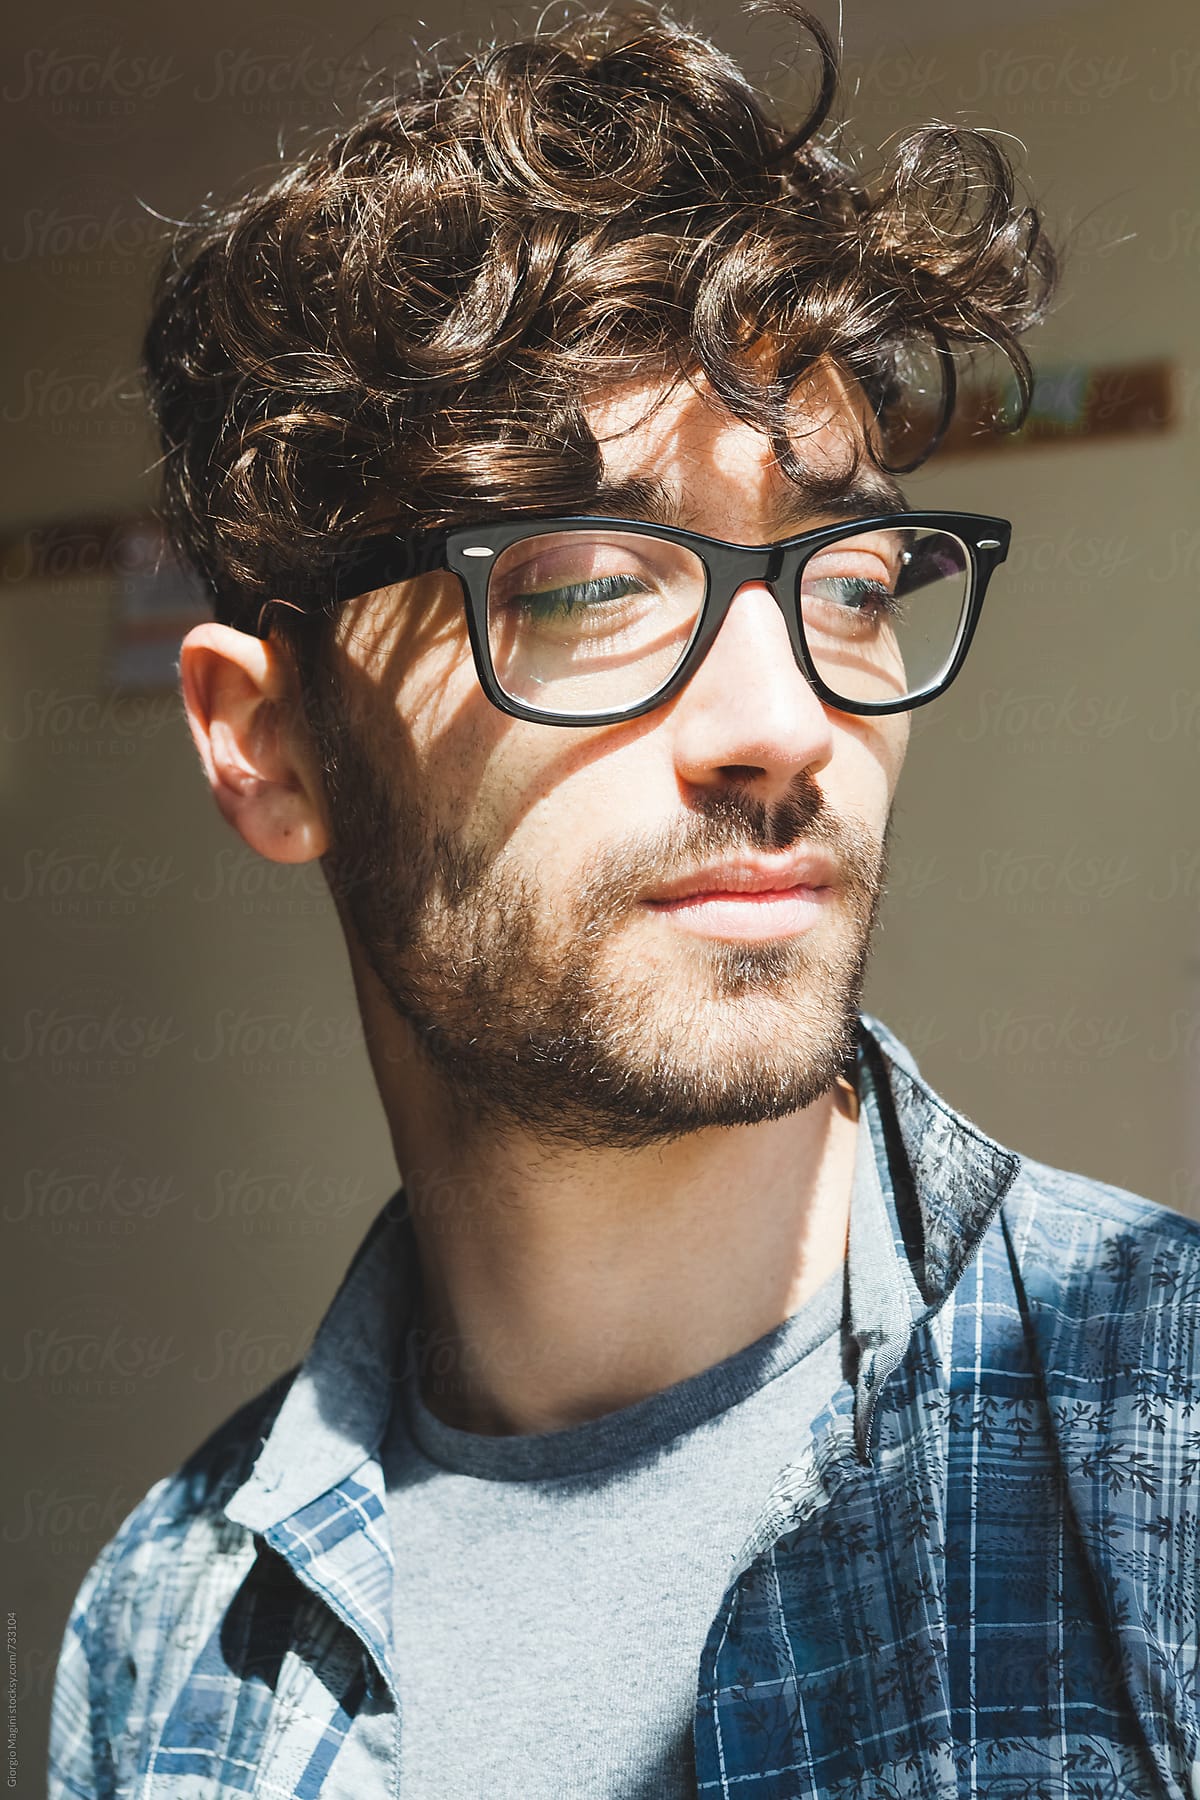 Kanon sandhed Vanding Portrait Of A Young College Student With Glasses" by Stocksy Contributor  "Giorgio Magini" - Stocksy